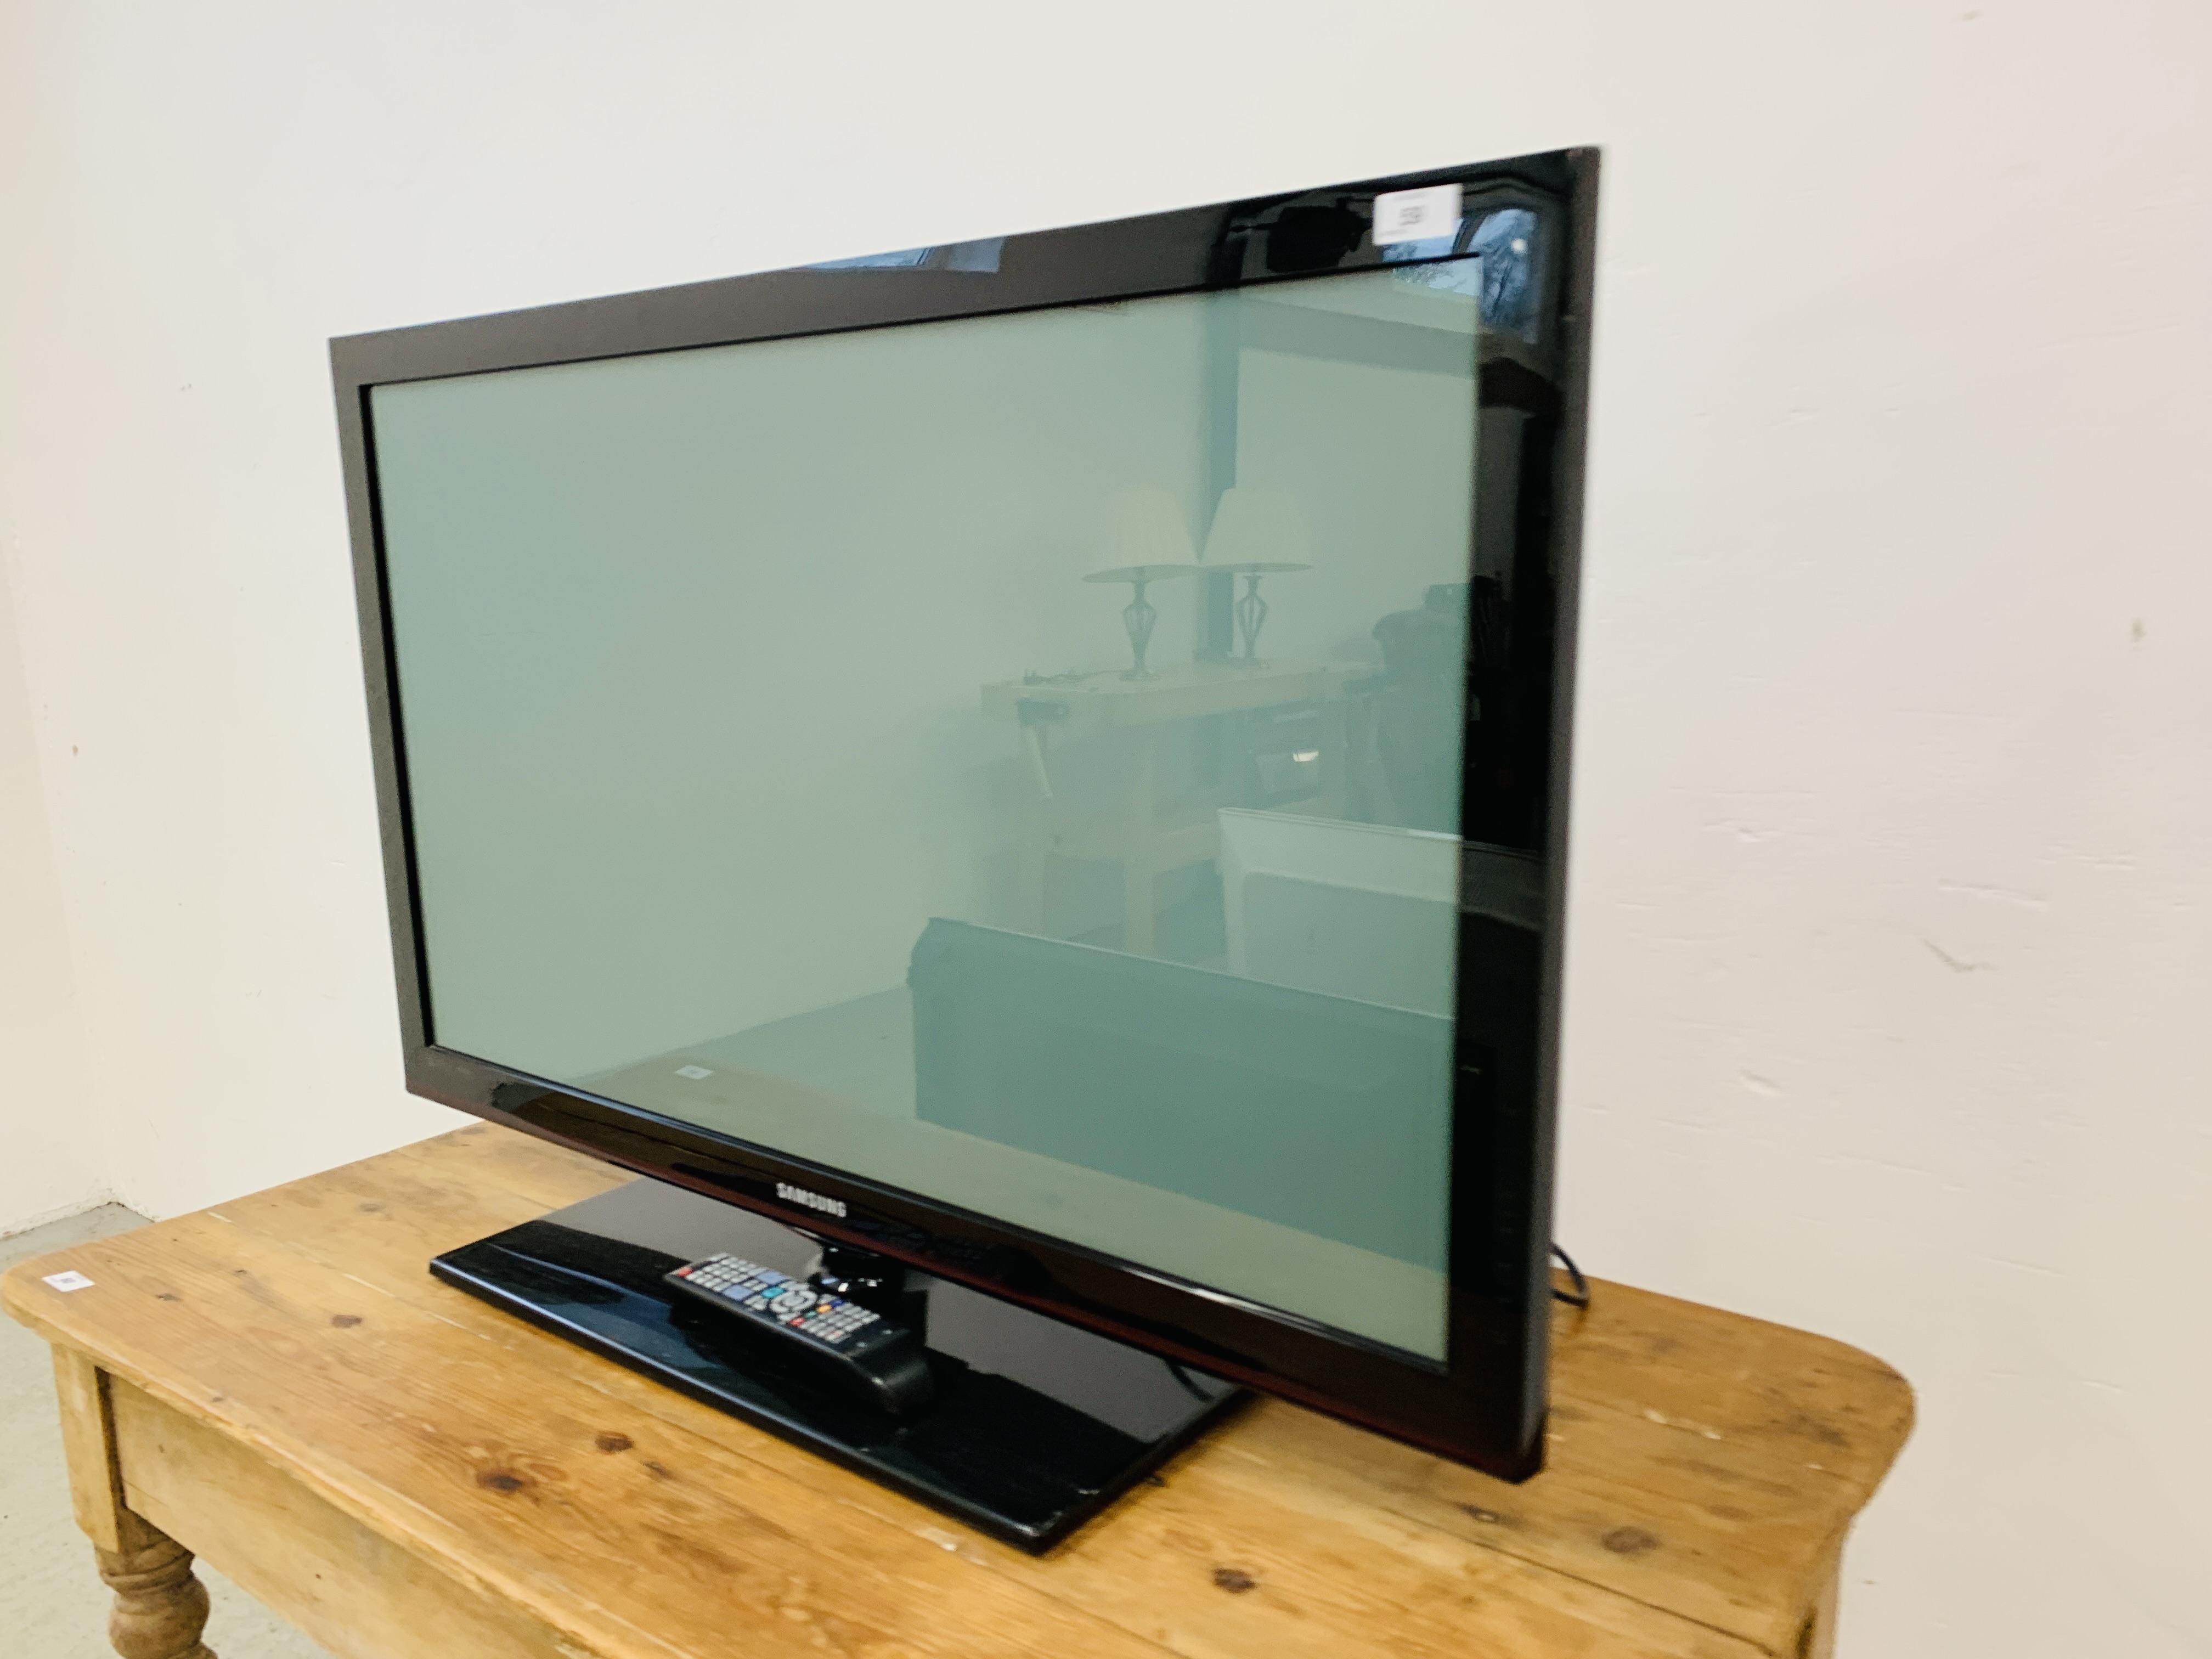 SAMSUNG 42 INCH TELEVISION WITH REMOTE - SOLD AS SEEN.